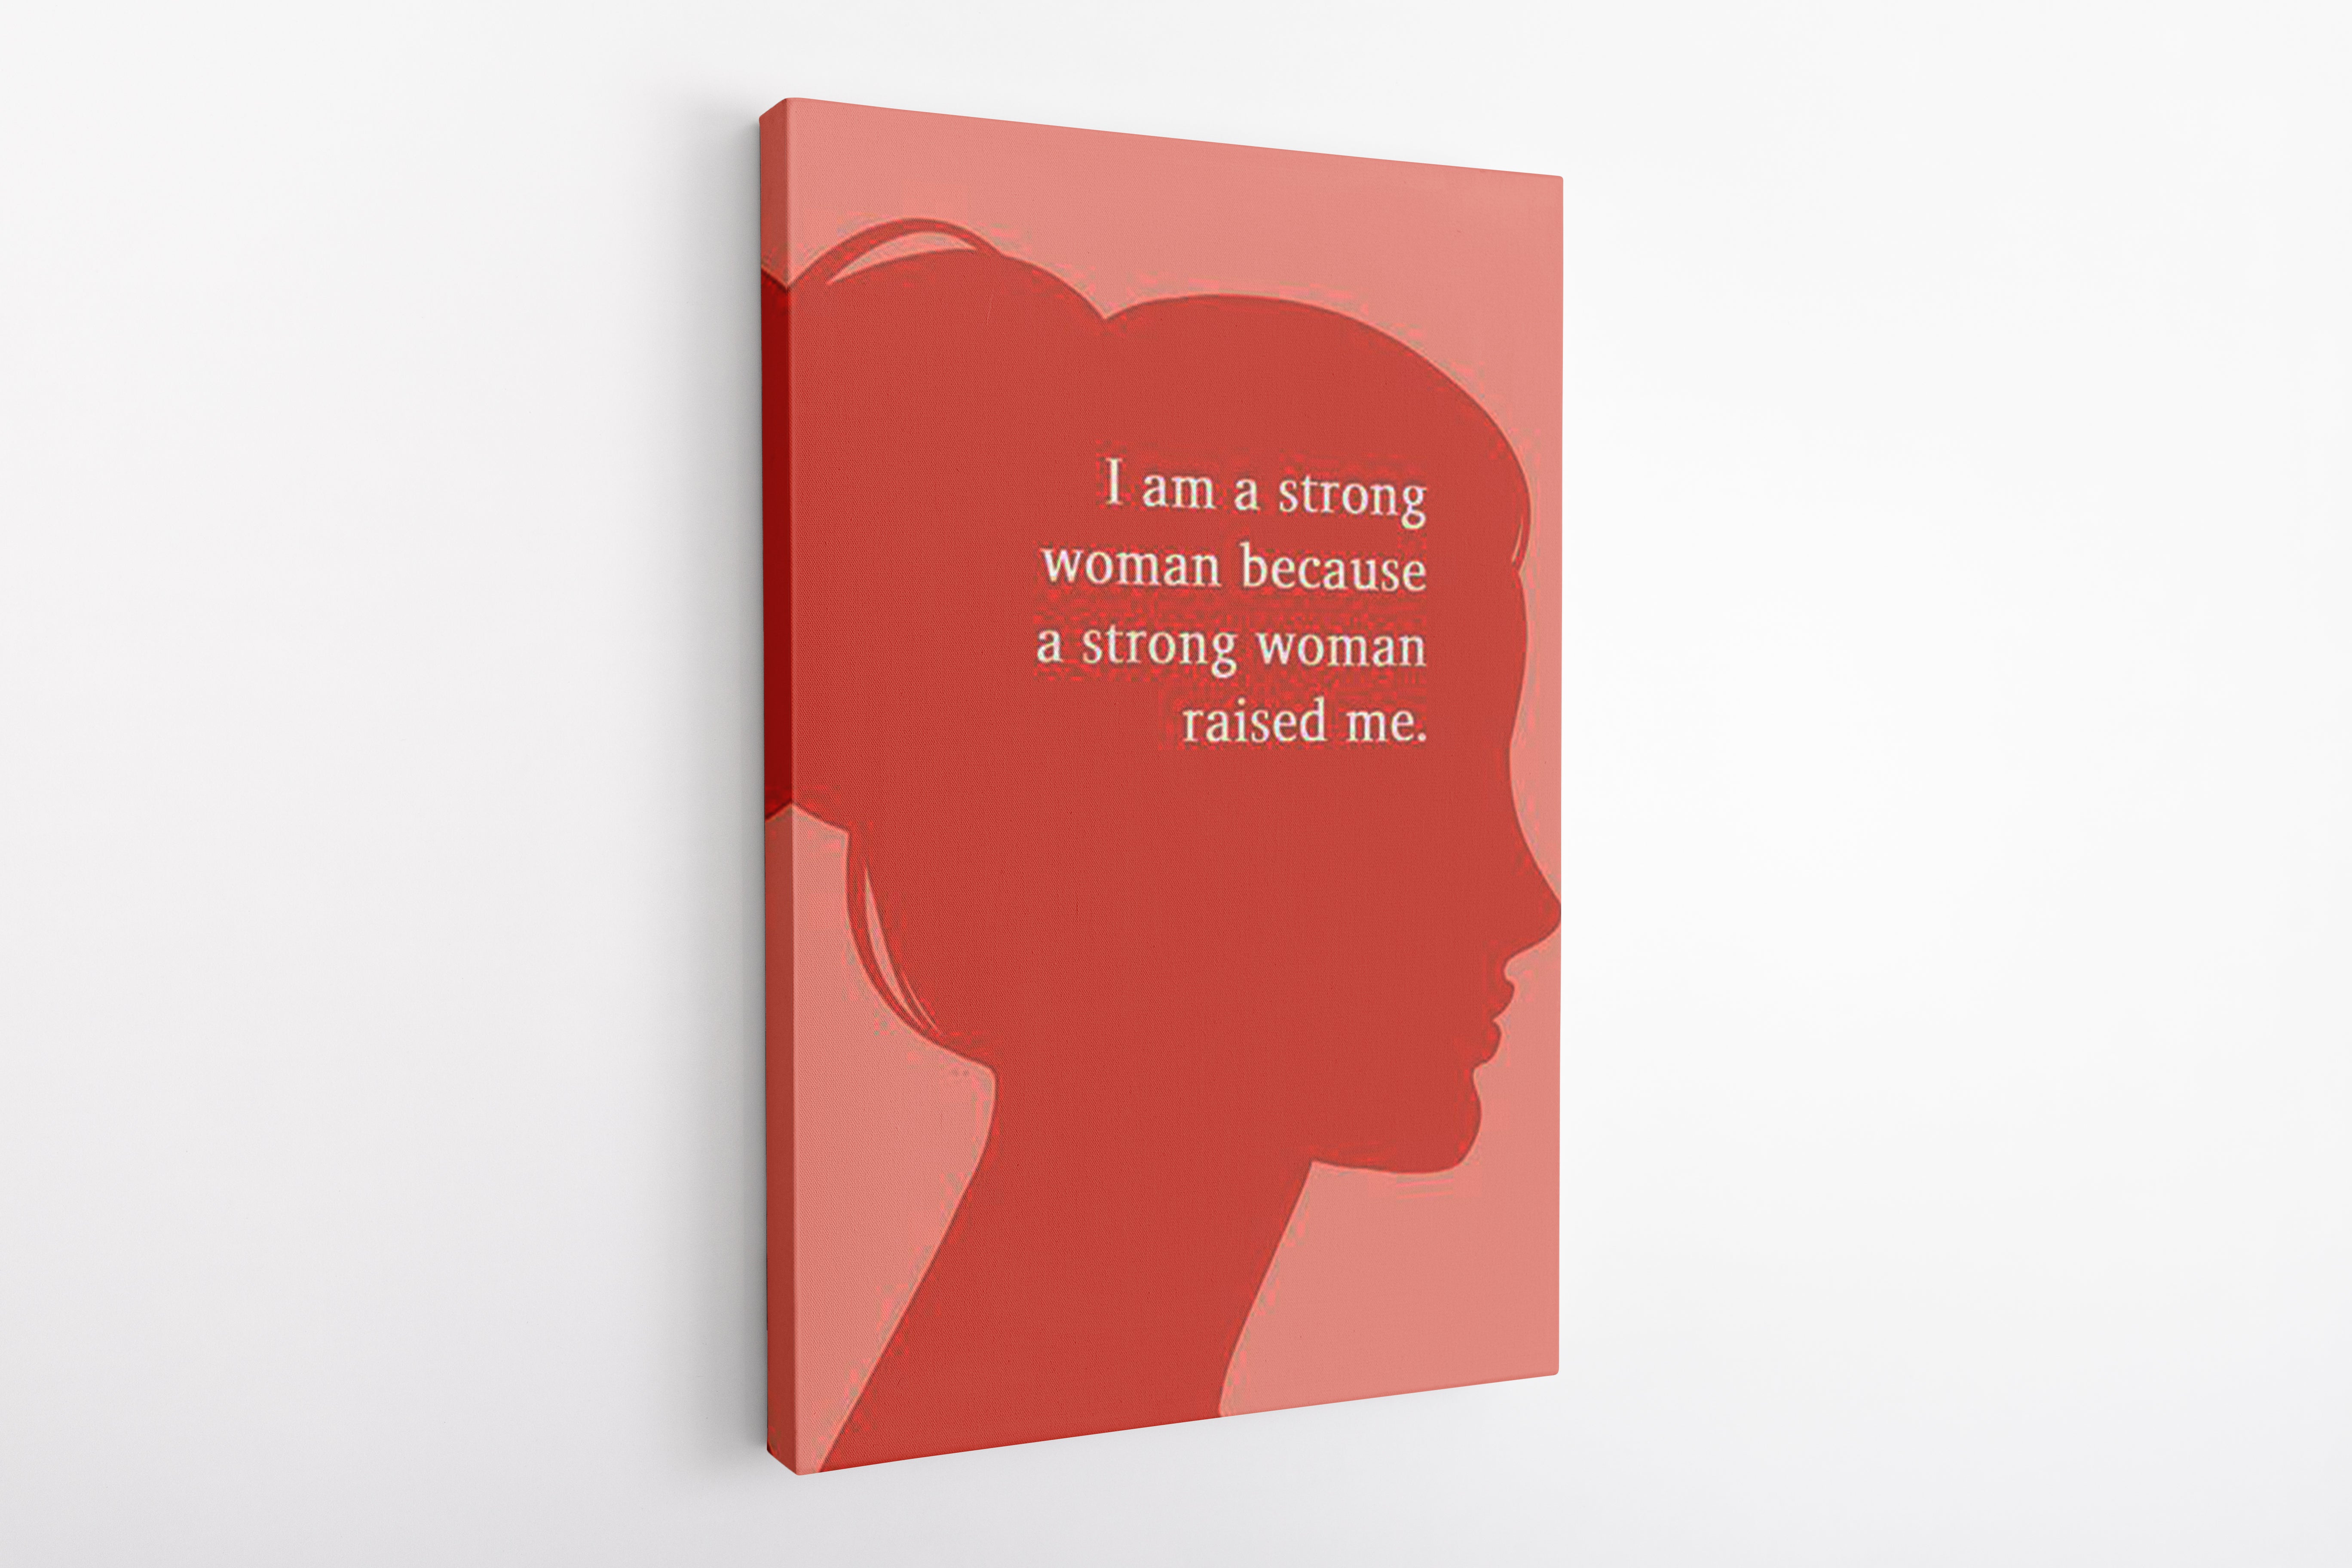 I am a strong woman (3.5cm Gallery Depth)